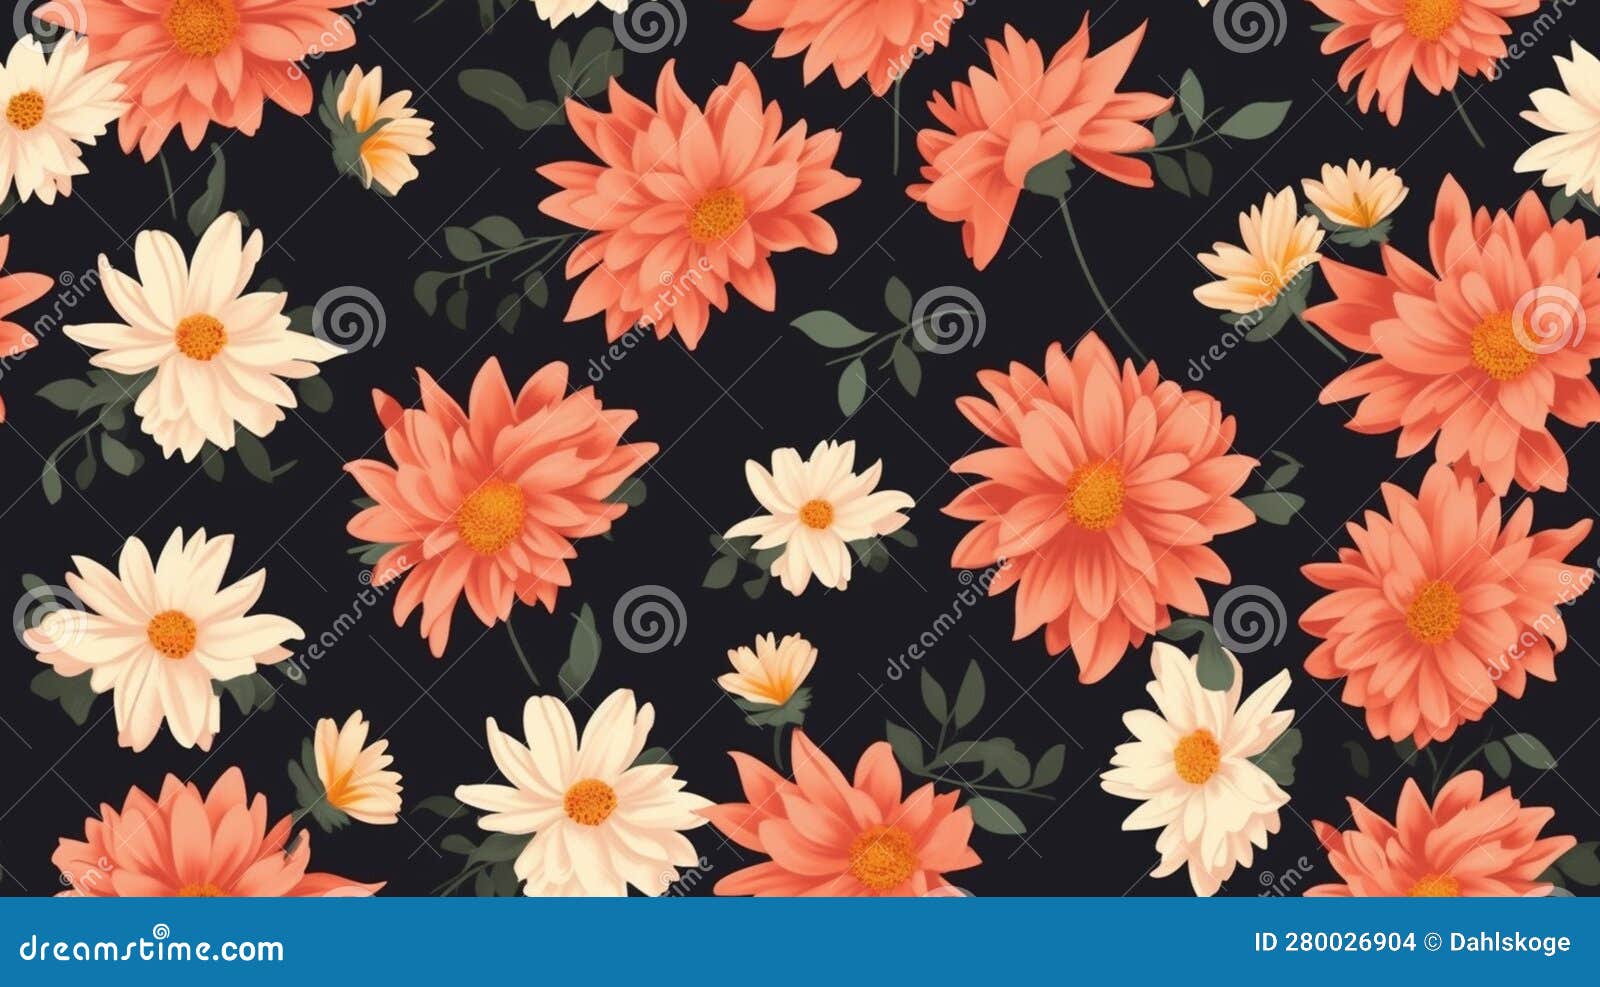 dalia flower pattern in different colors